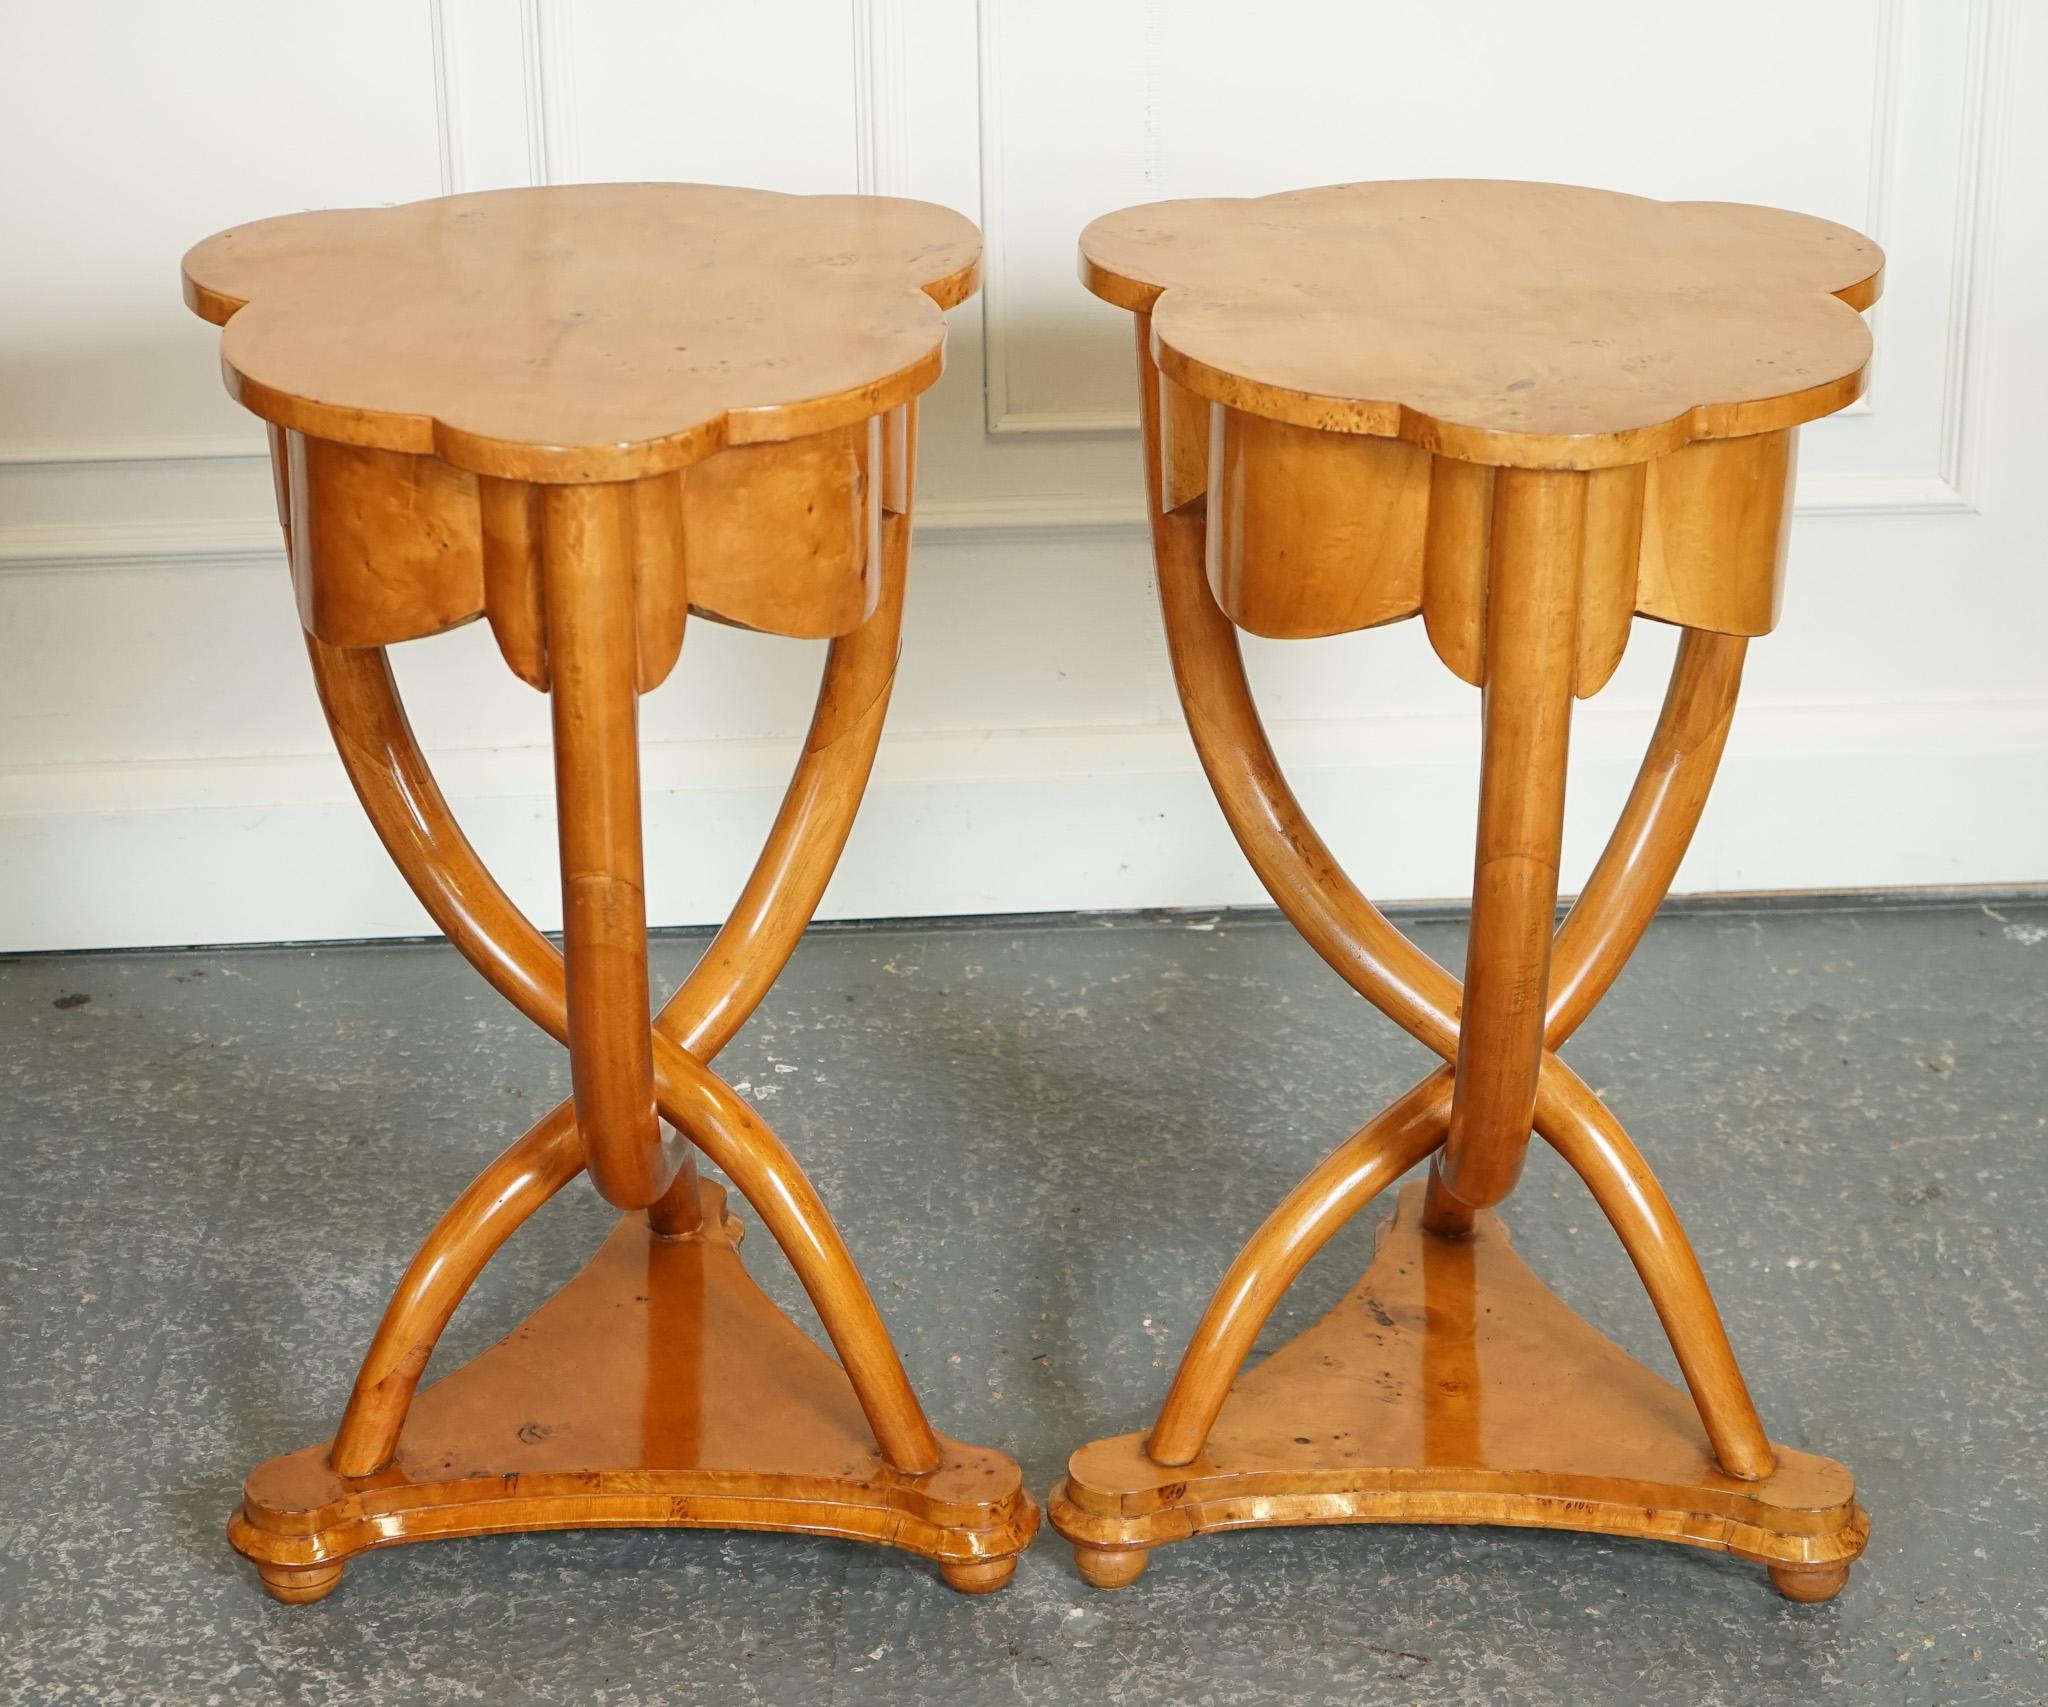 Hand-Crafted PAIR ART DECO WALNUT OCCASIONAL BEDSIDE NiGHTSTAND TABLES CURVED LEGS J1